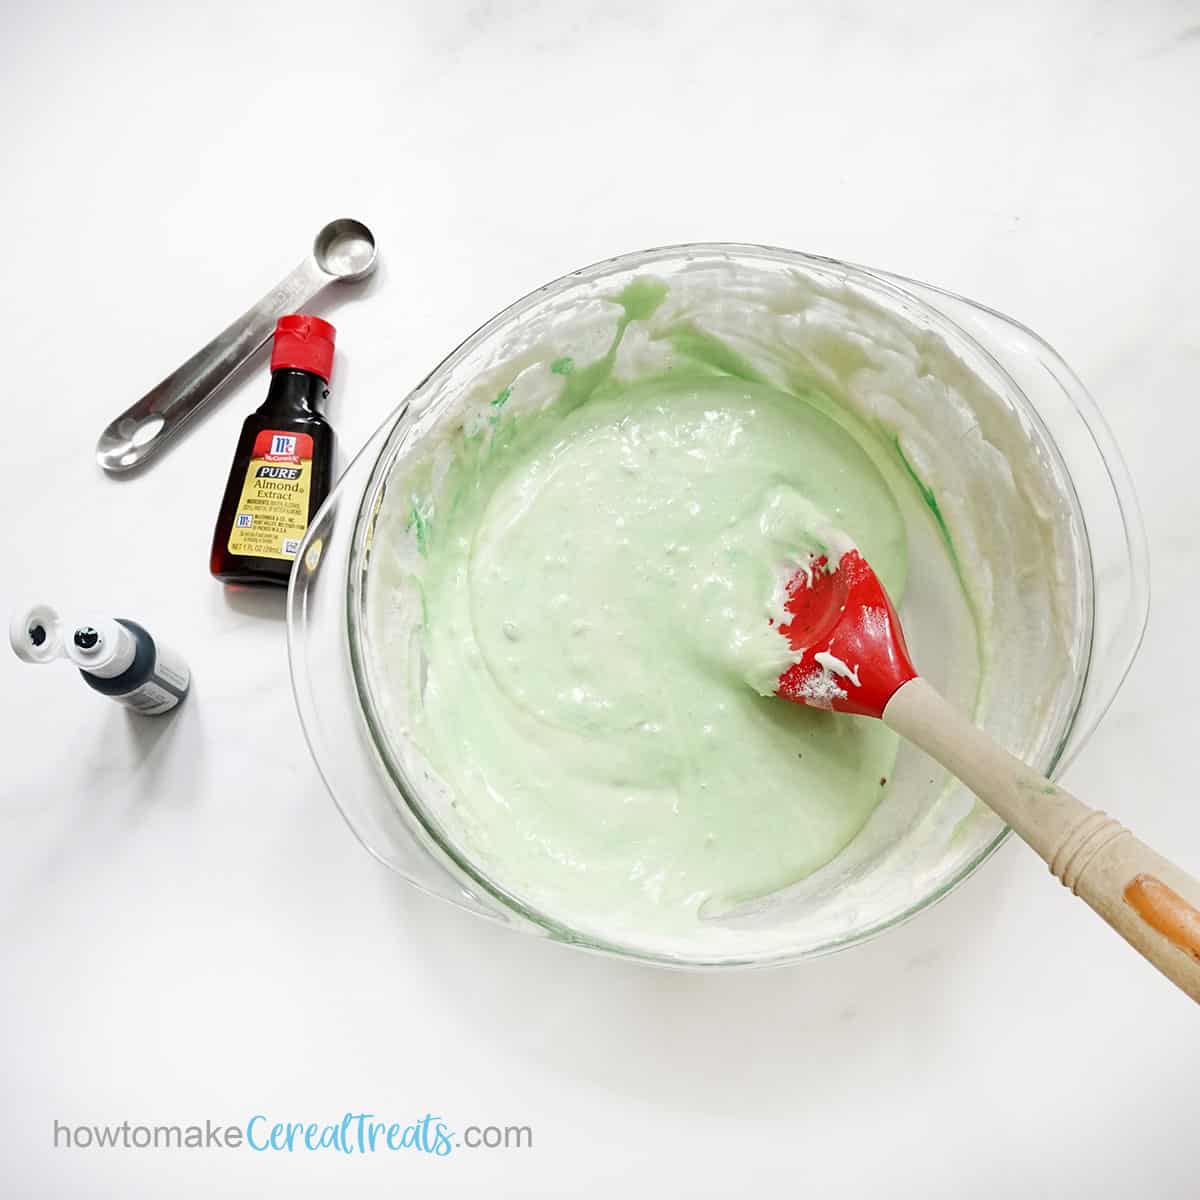 mixing green food coloring into marshmallows, butter, and pistachio pudding mixture